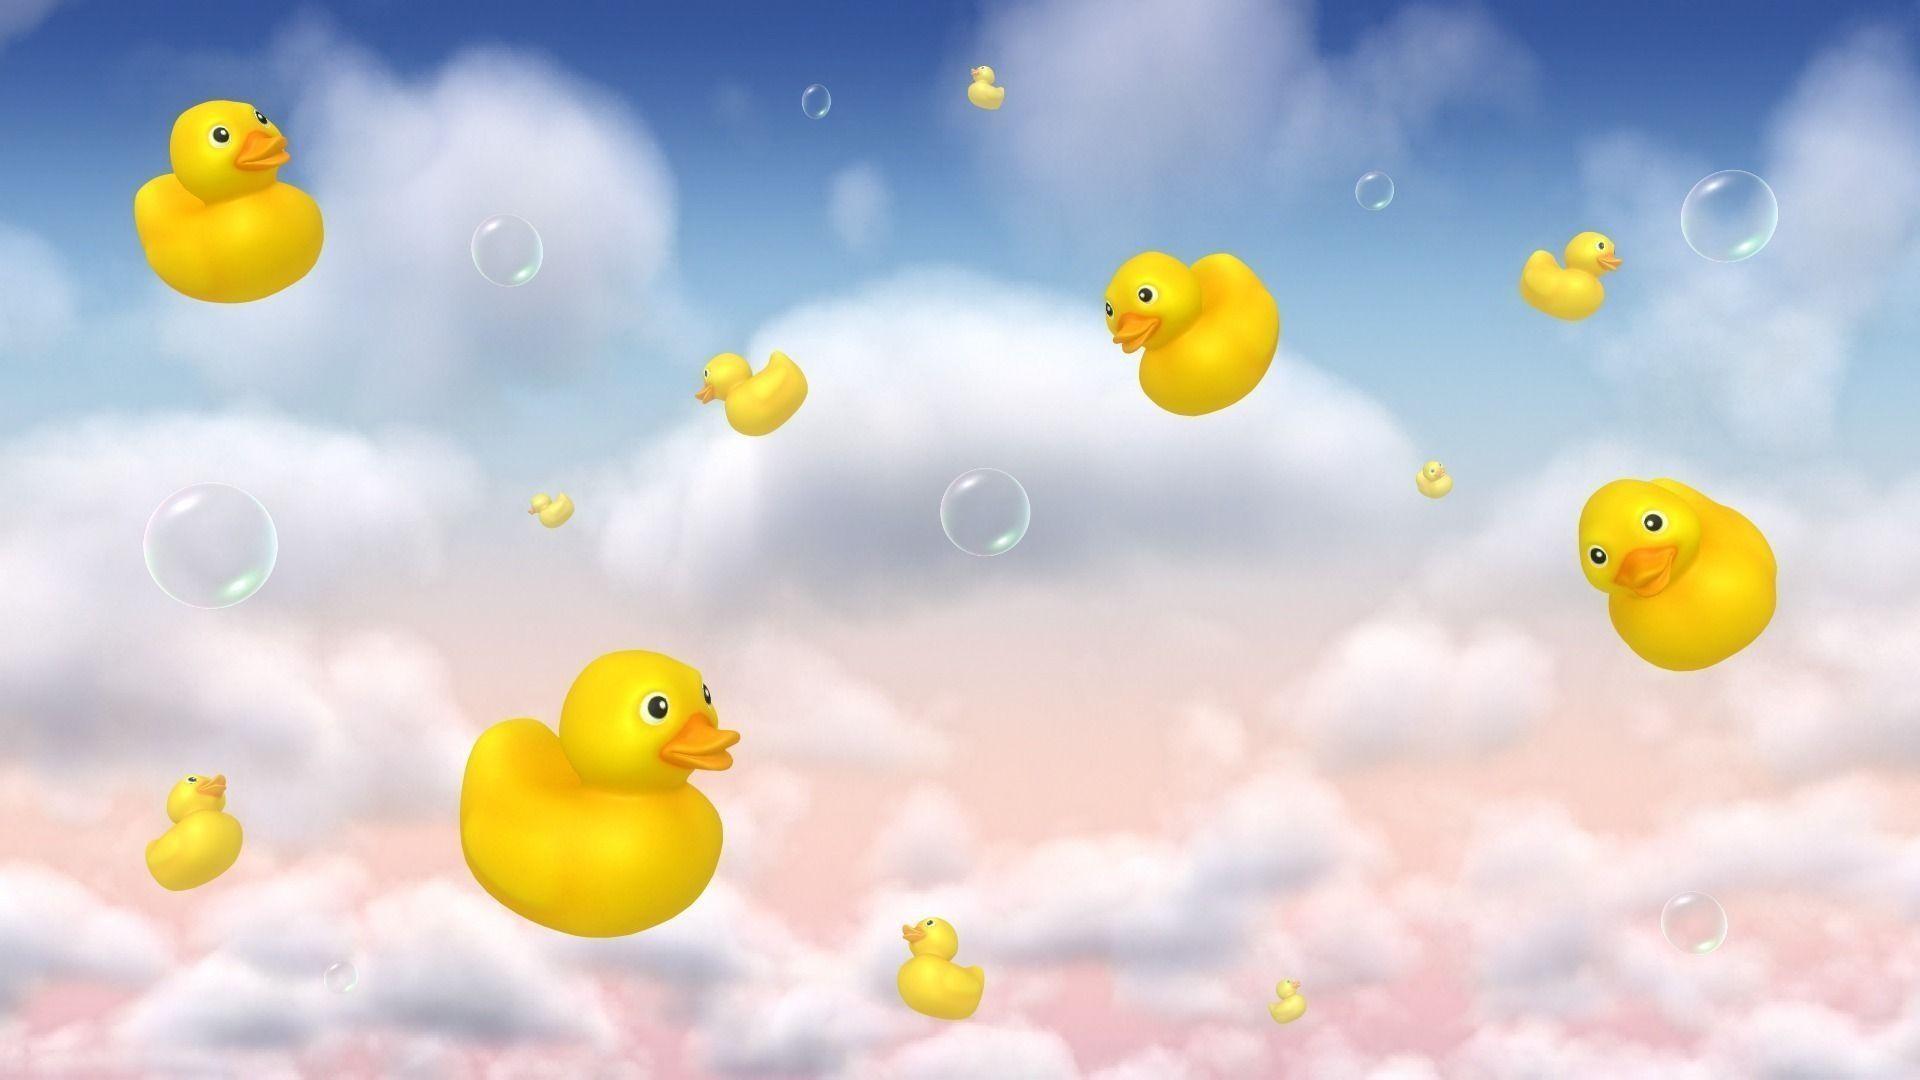 Rubber Ducky Wallpaper background picture